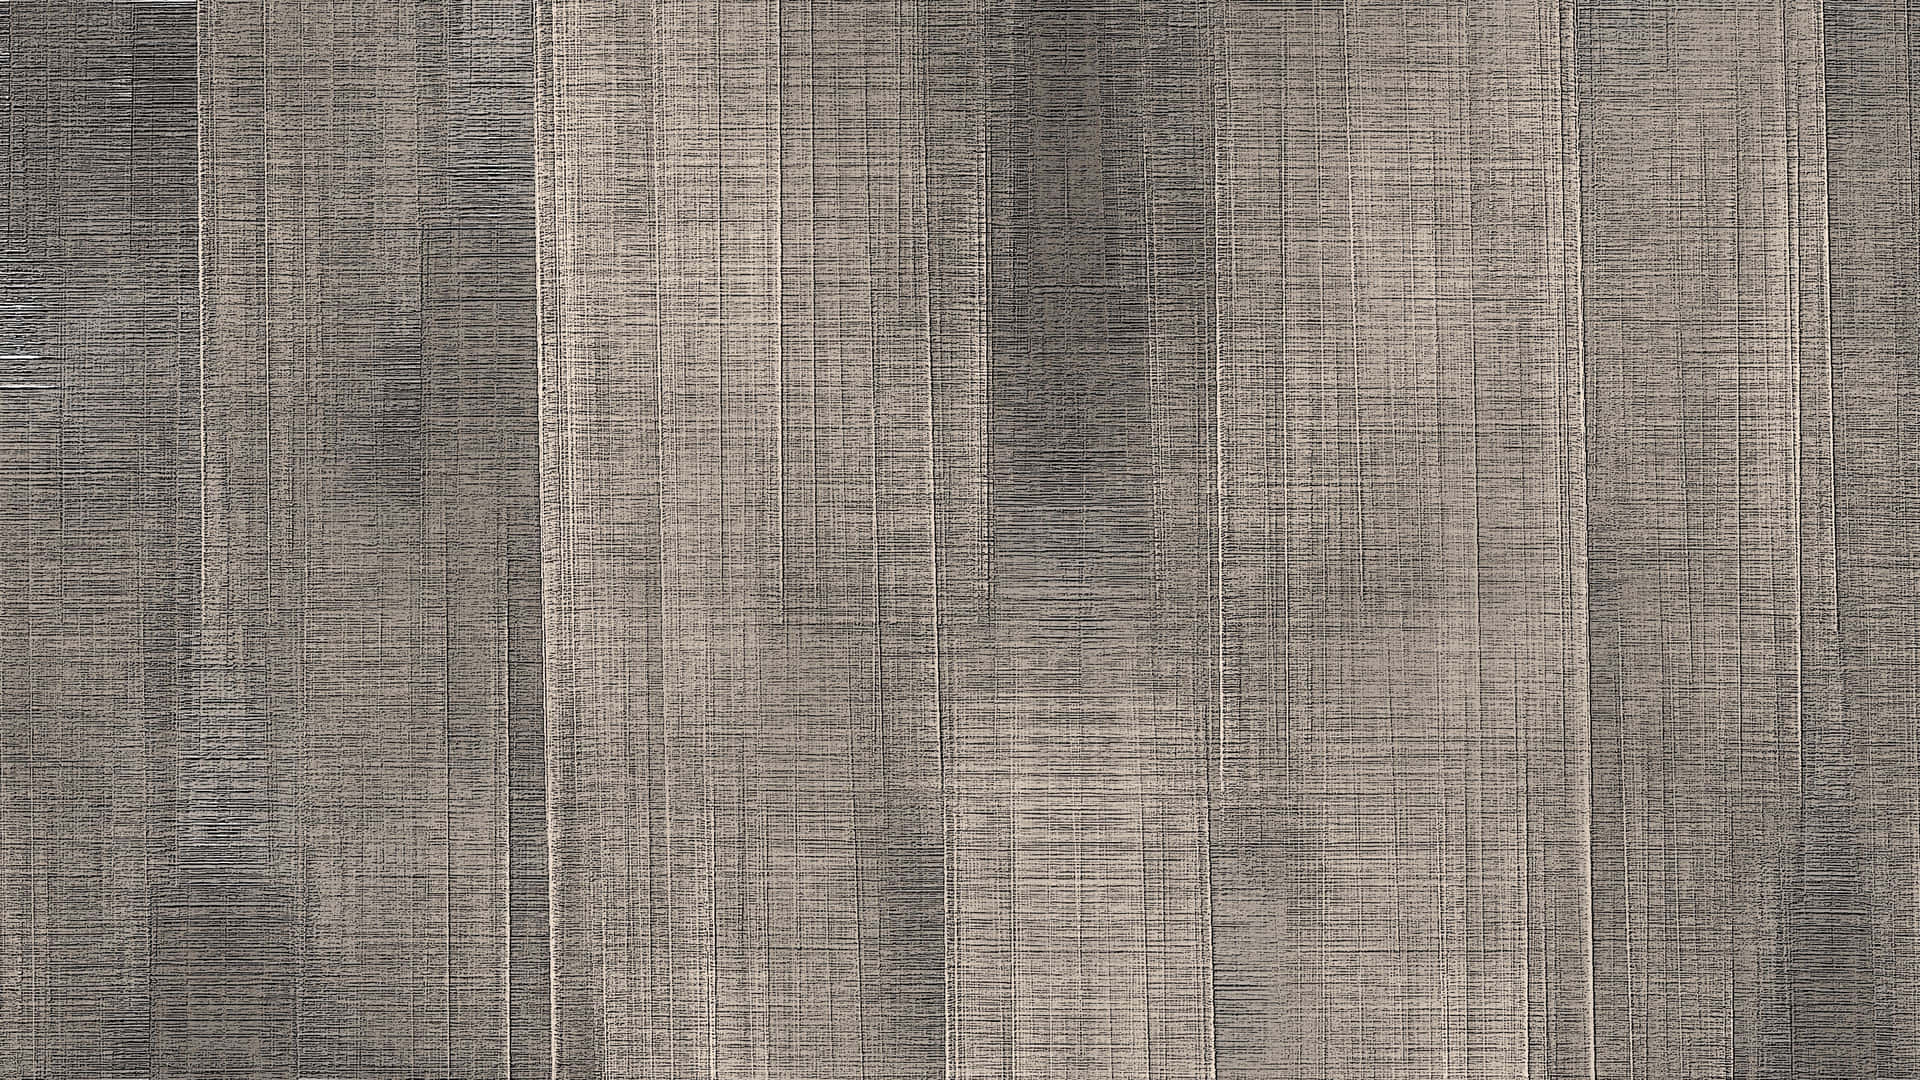 A Gray And White Wallpaper With A Wood Grain